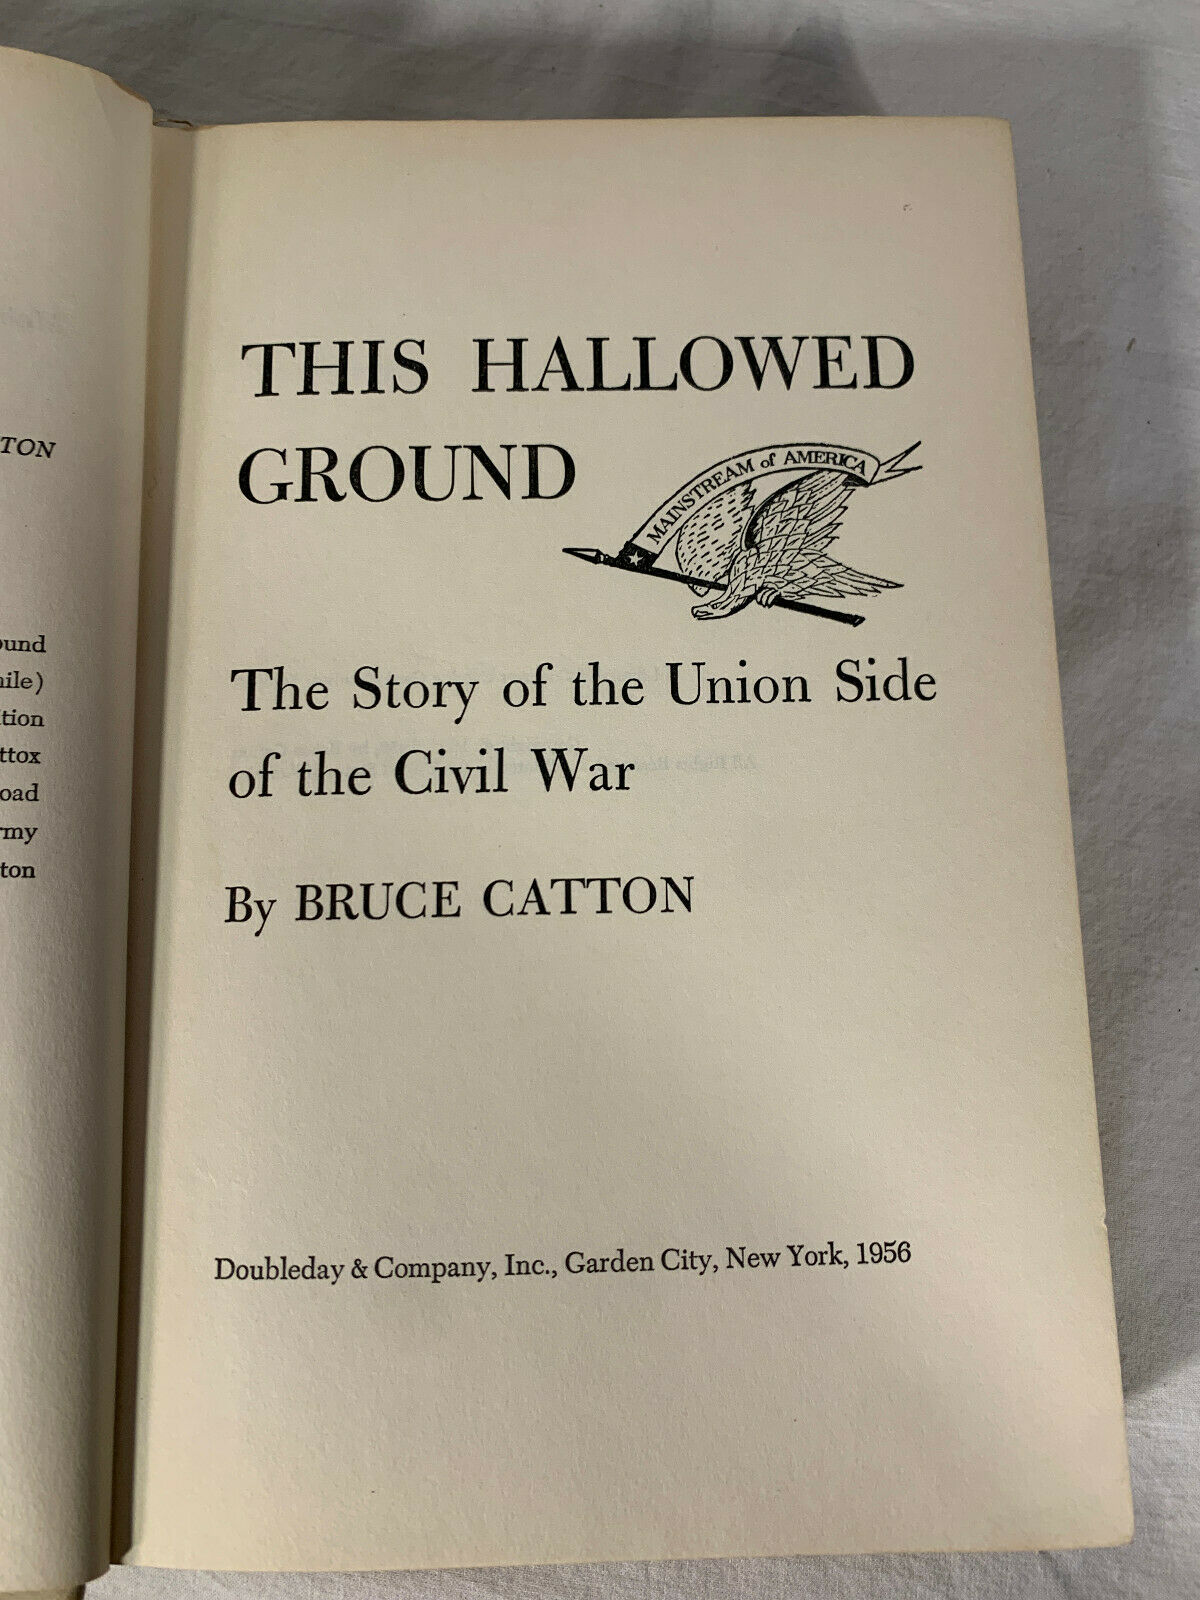 This Hallowed Ground By Bruce Catton, Union Side of the Civil War, 1956